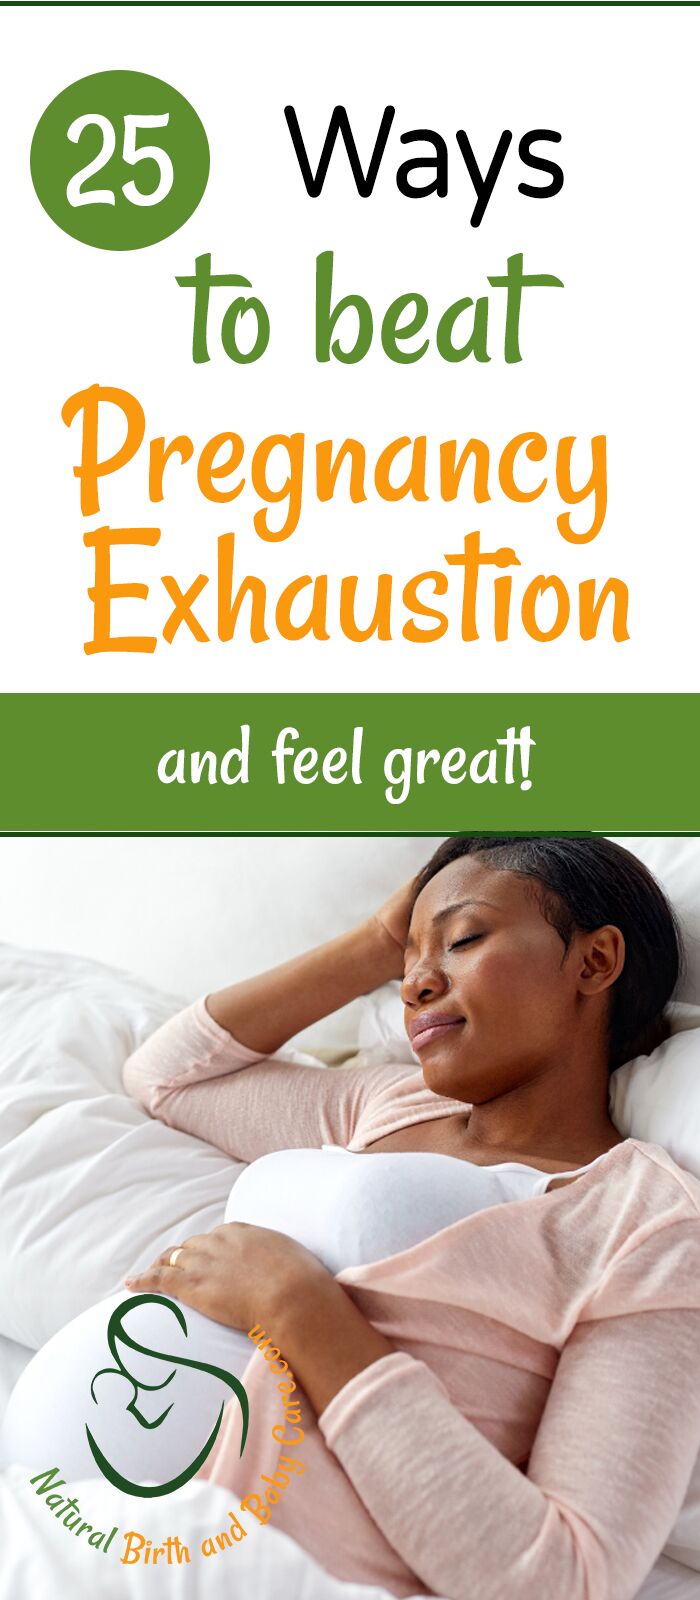 African-American pregnant mom resting peacefully with beat pregnancy exhaustion words superimposed